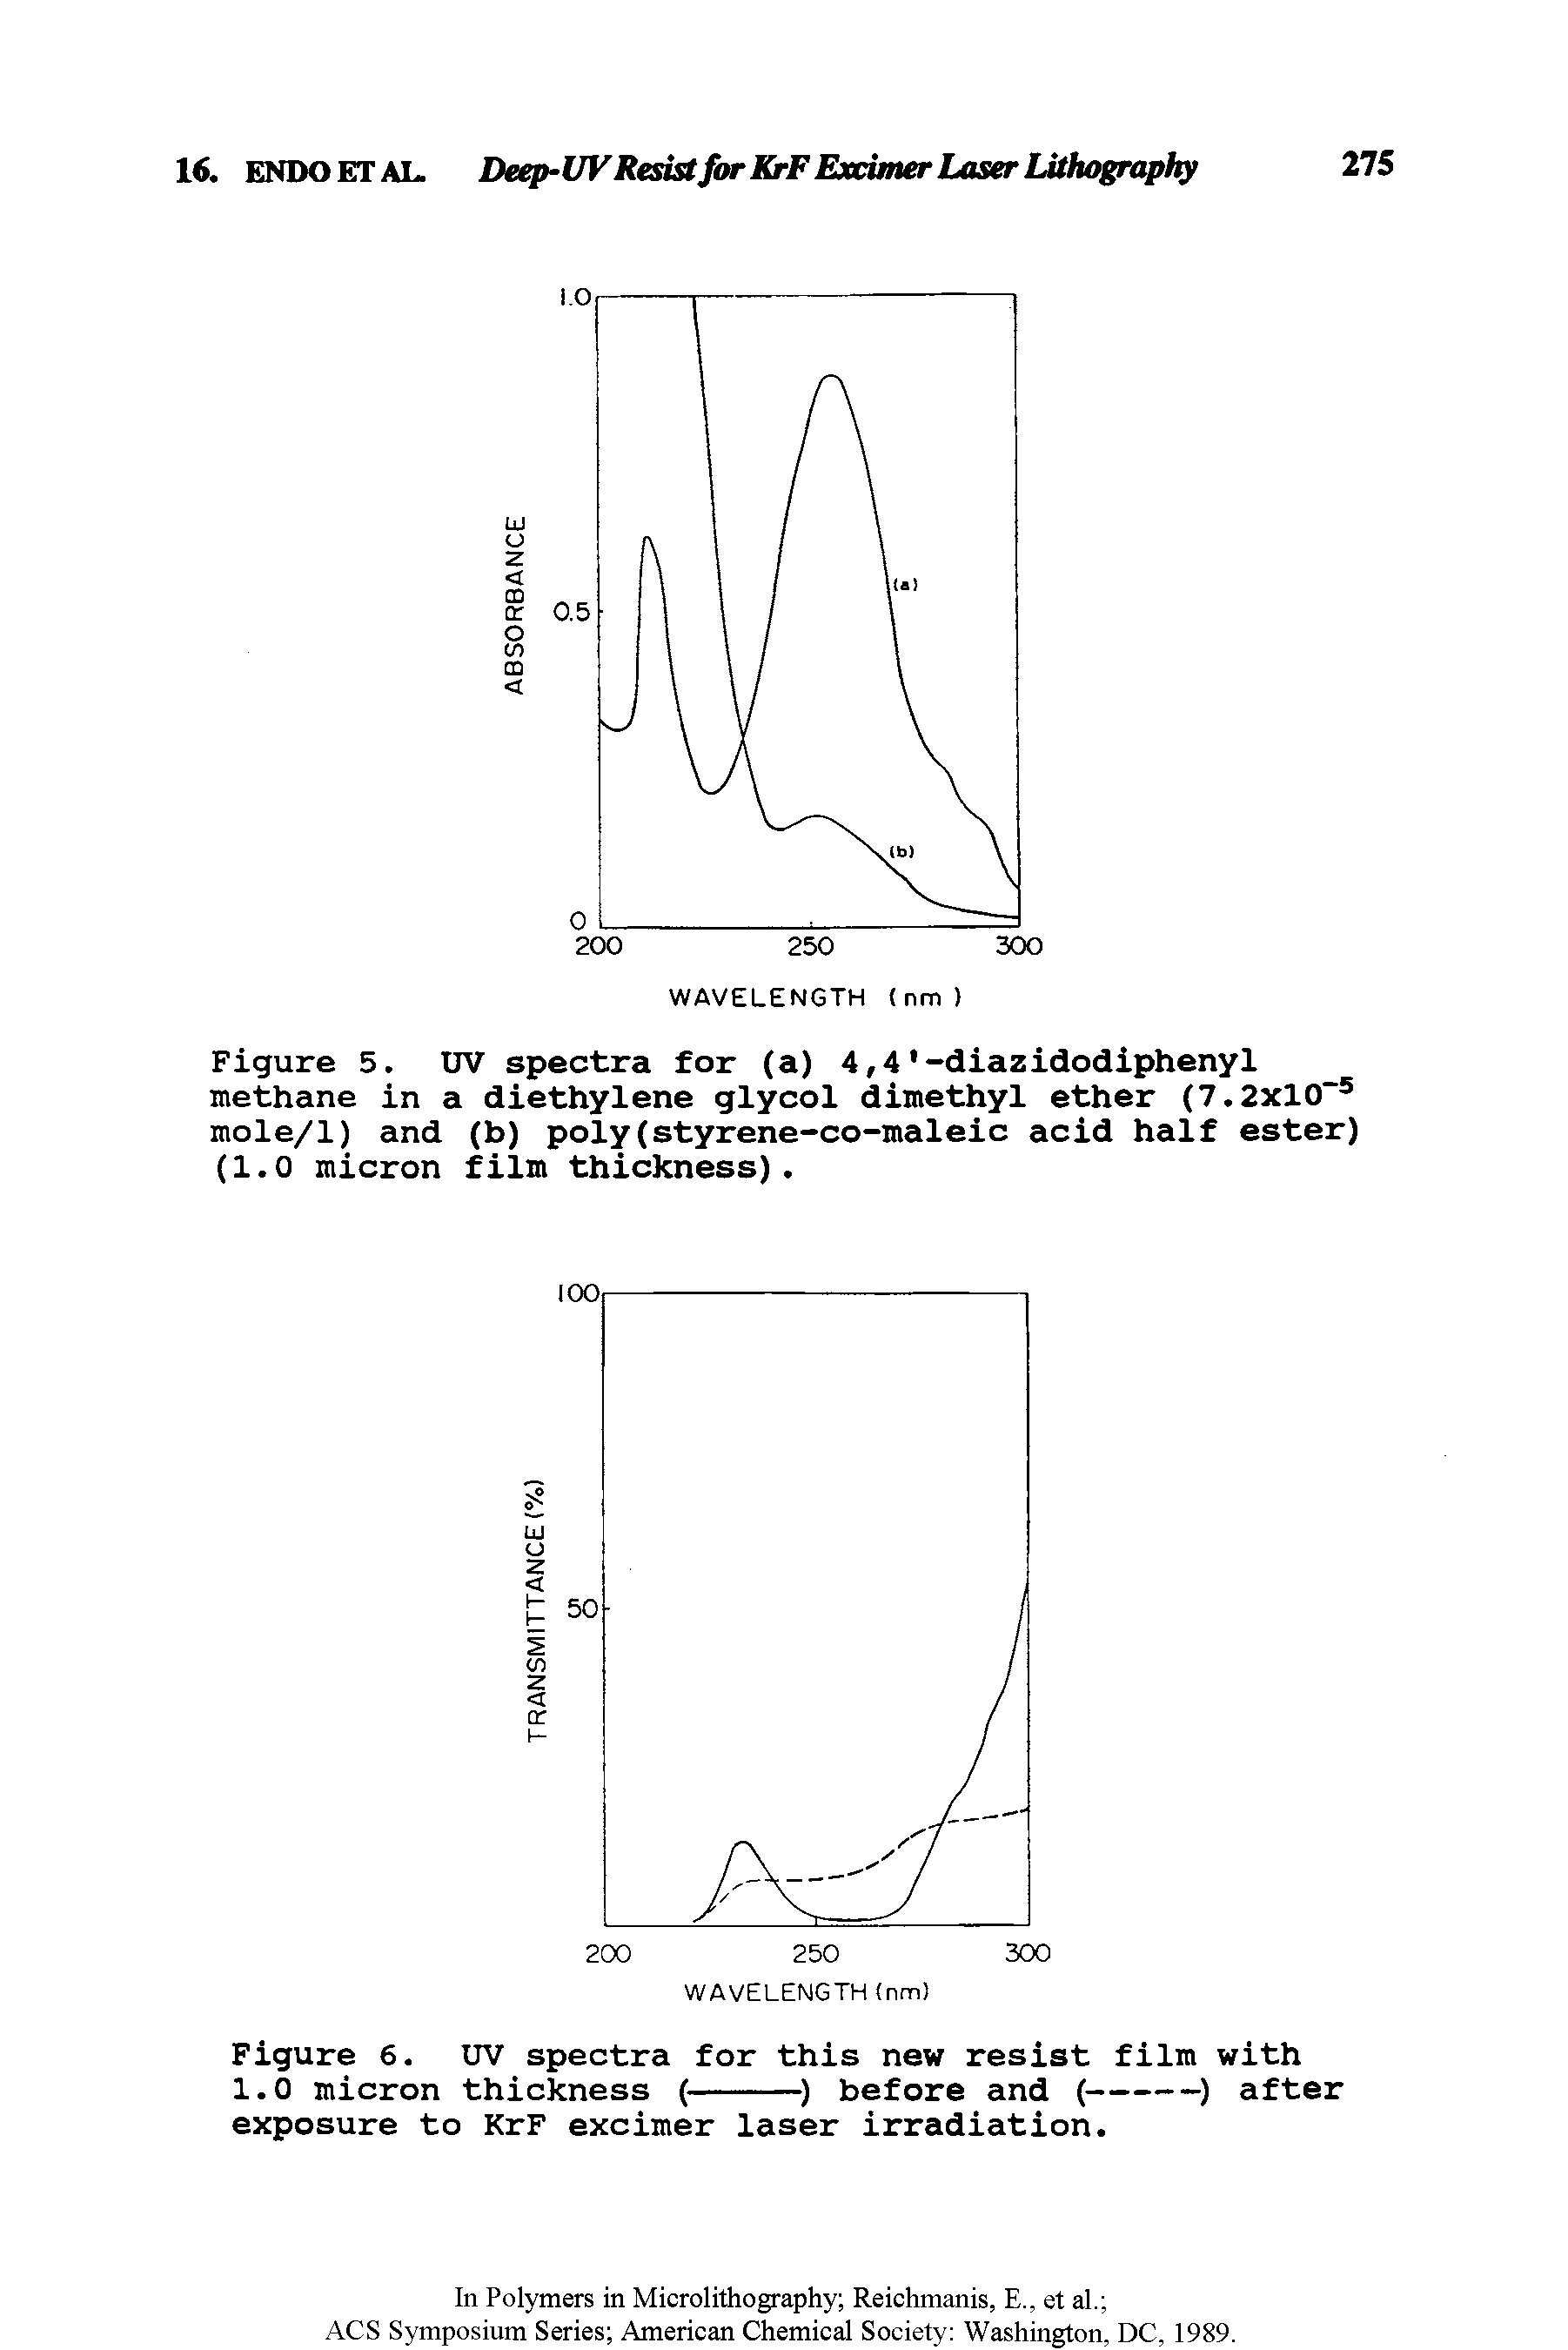 Figure 5. UV spectra for (a) 4,4 -diazidodiphenyl methane in a diethylene glycol dimethyl ether (7.2xl0 5 mole/1) and (b) poly(styrene-co-maleic acid half ester) (1.0 micron film thickness).